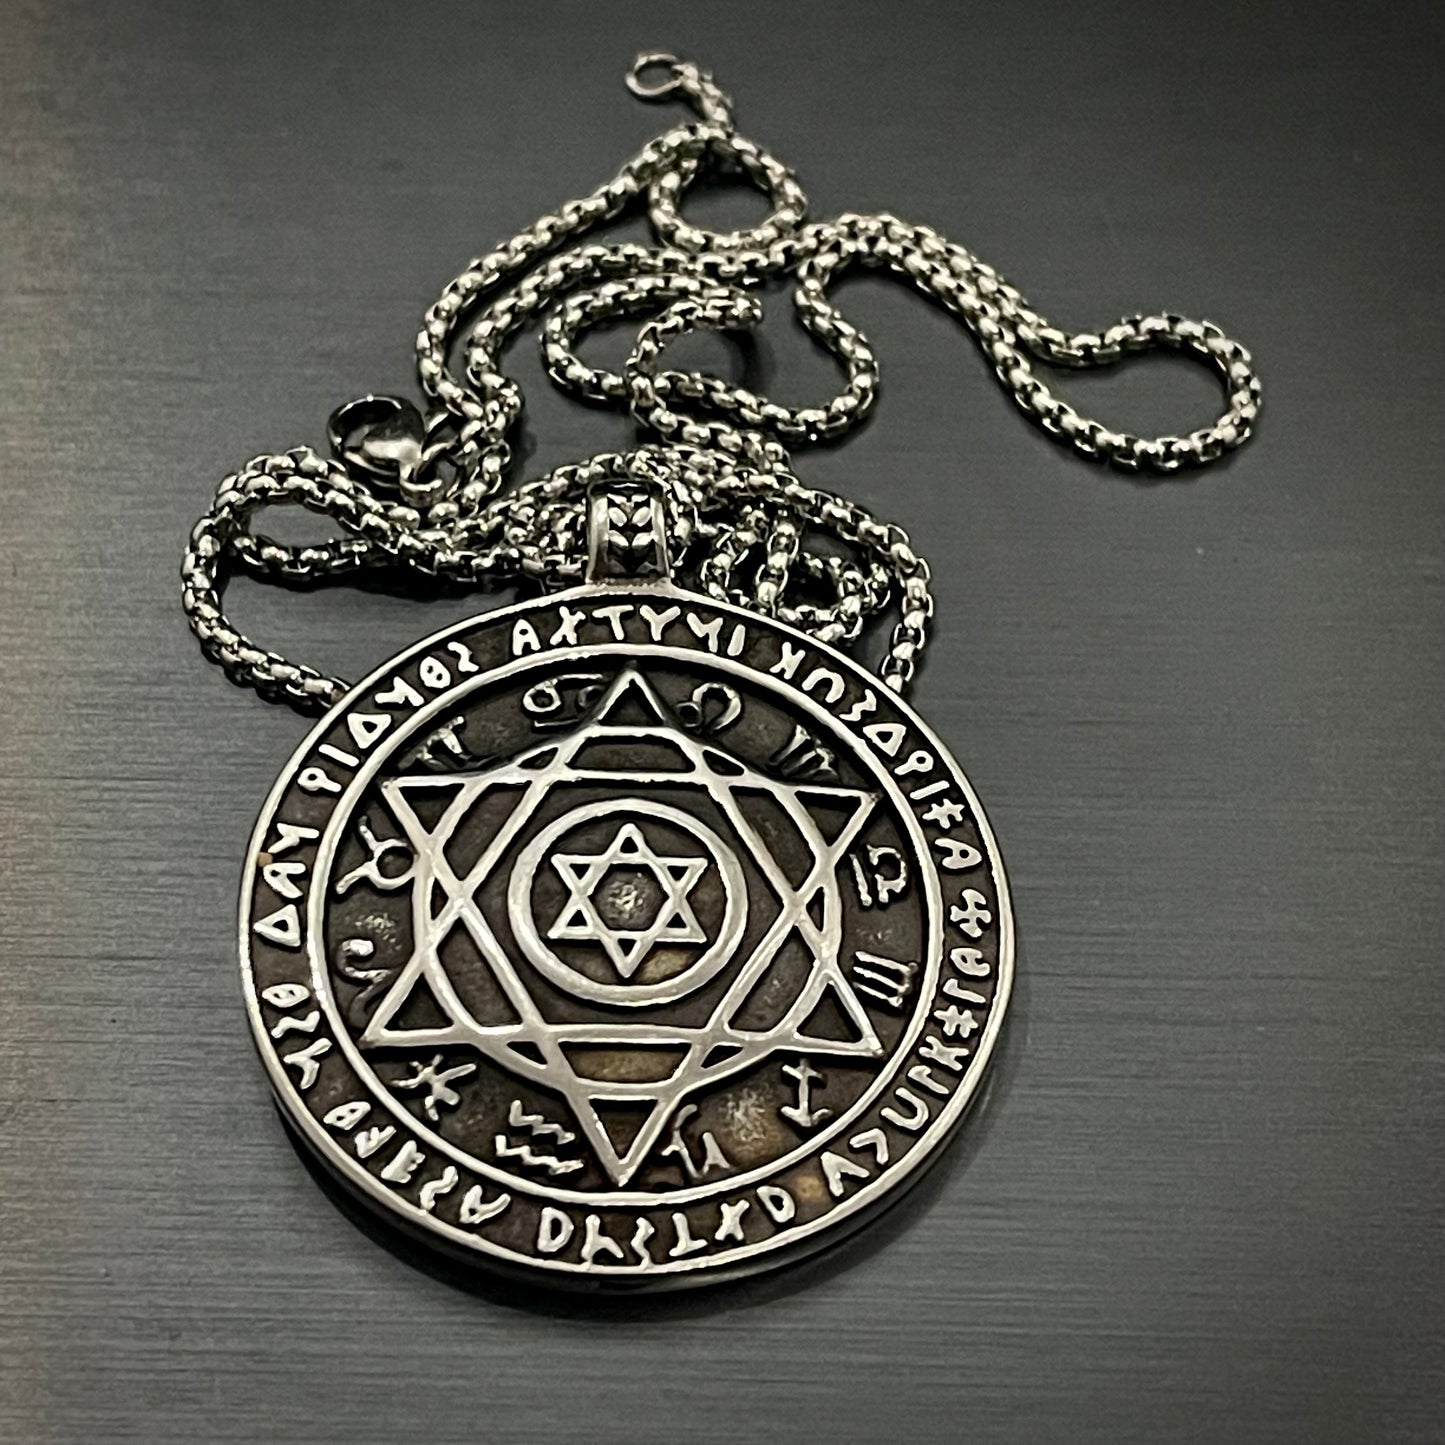 Vikings Coin Pendant Necklace For Men in Pakistan